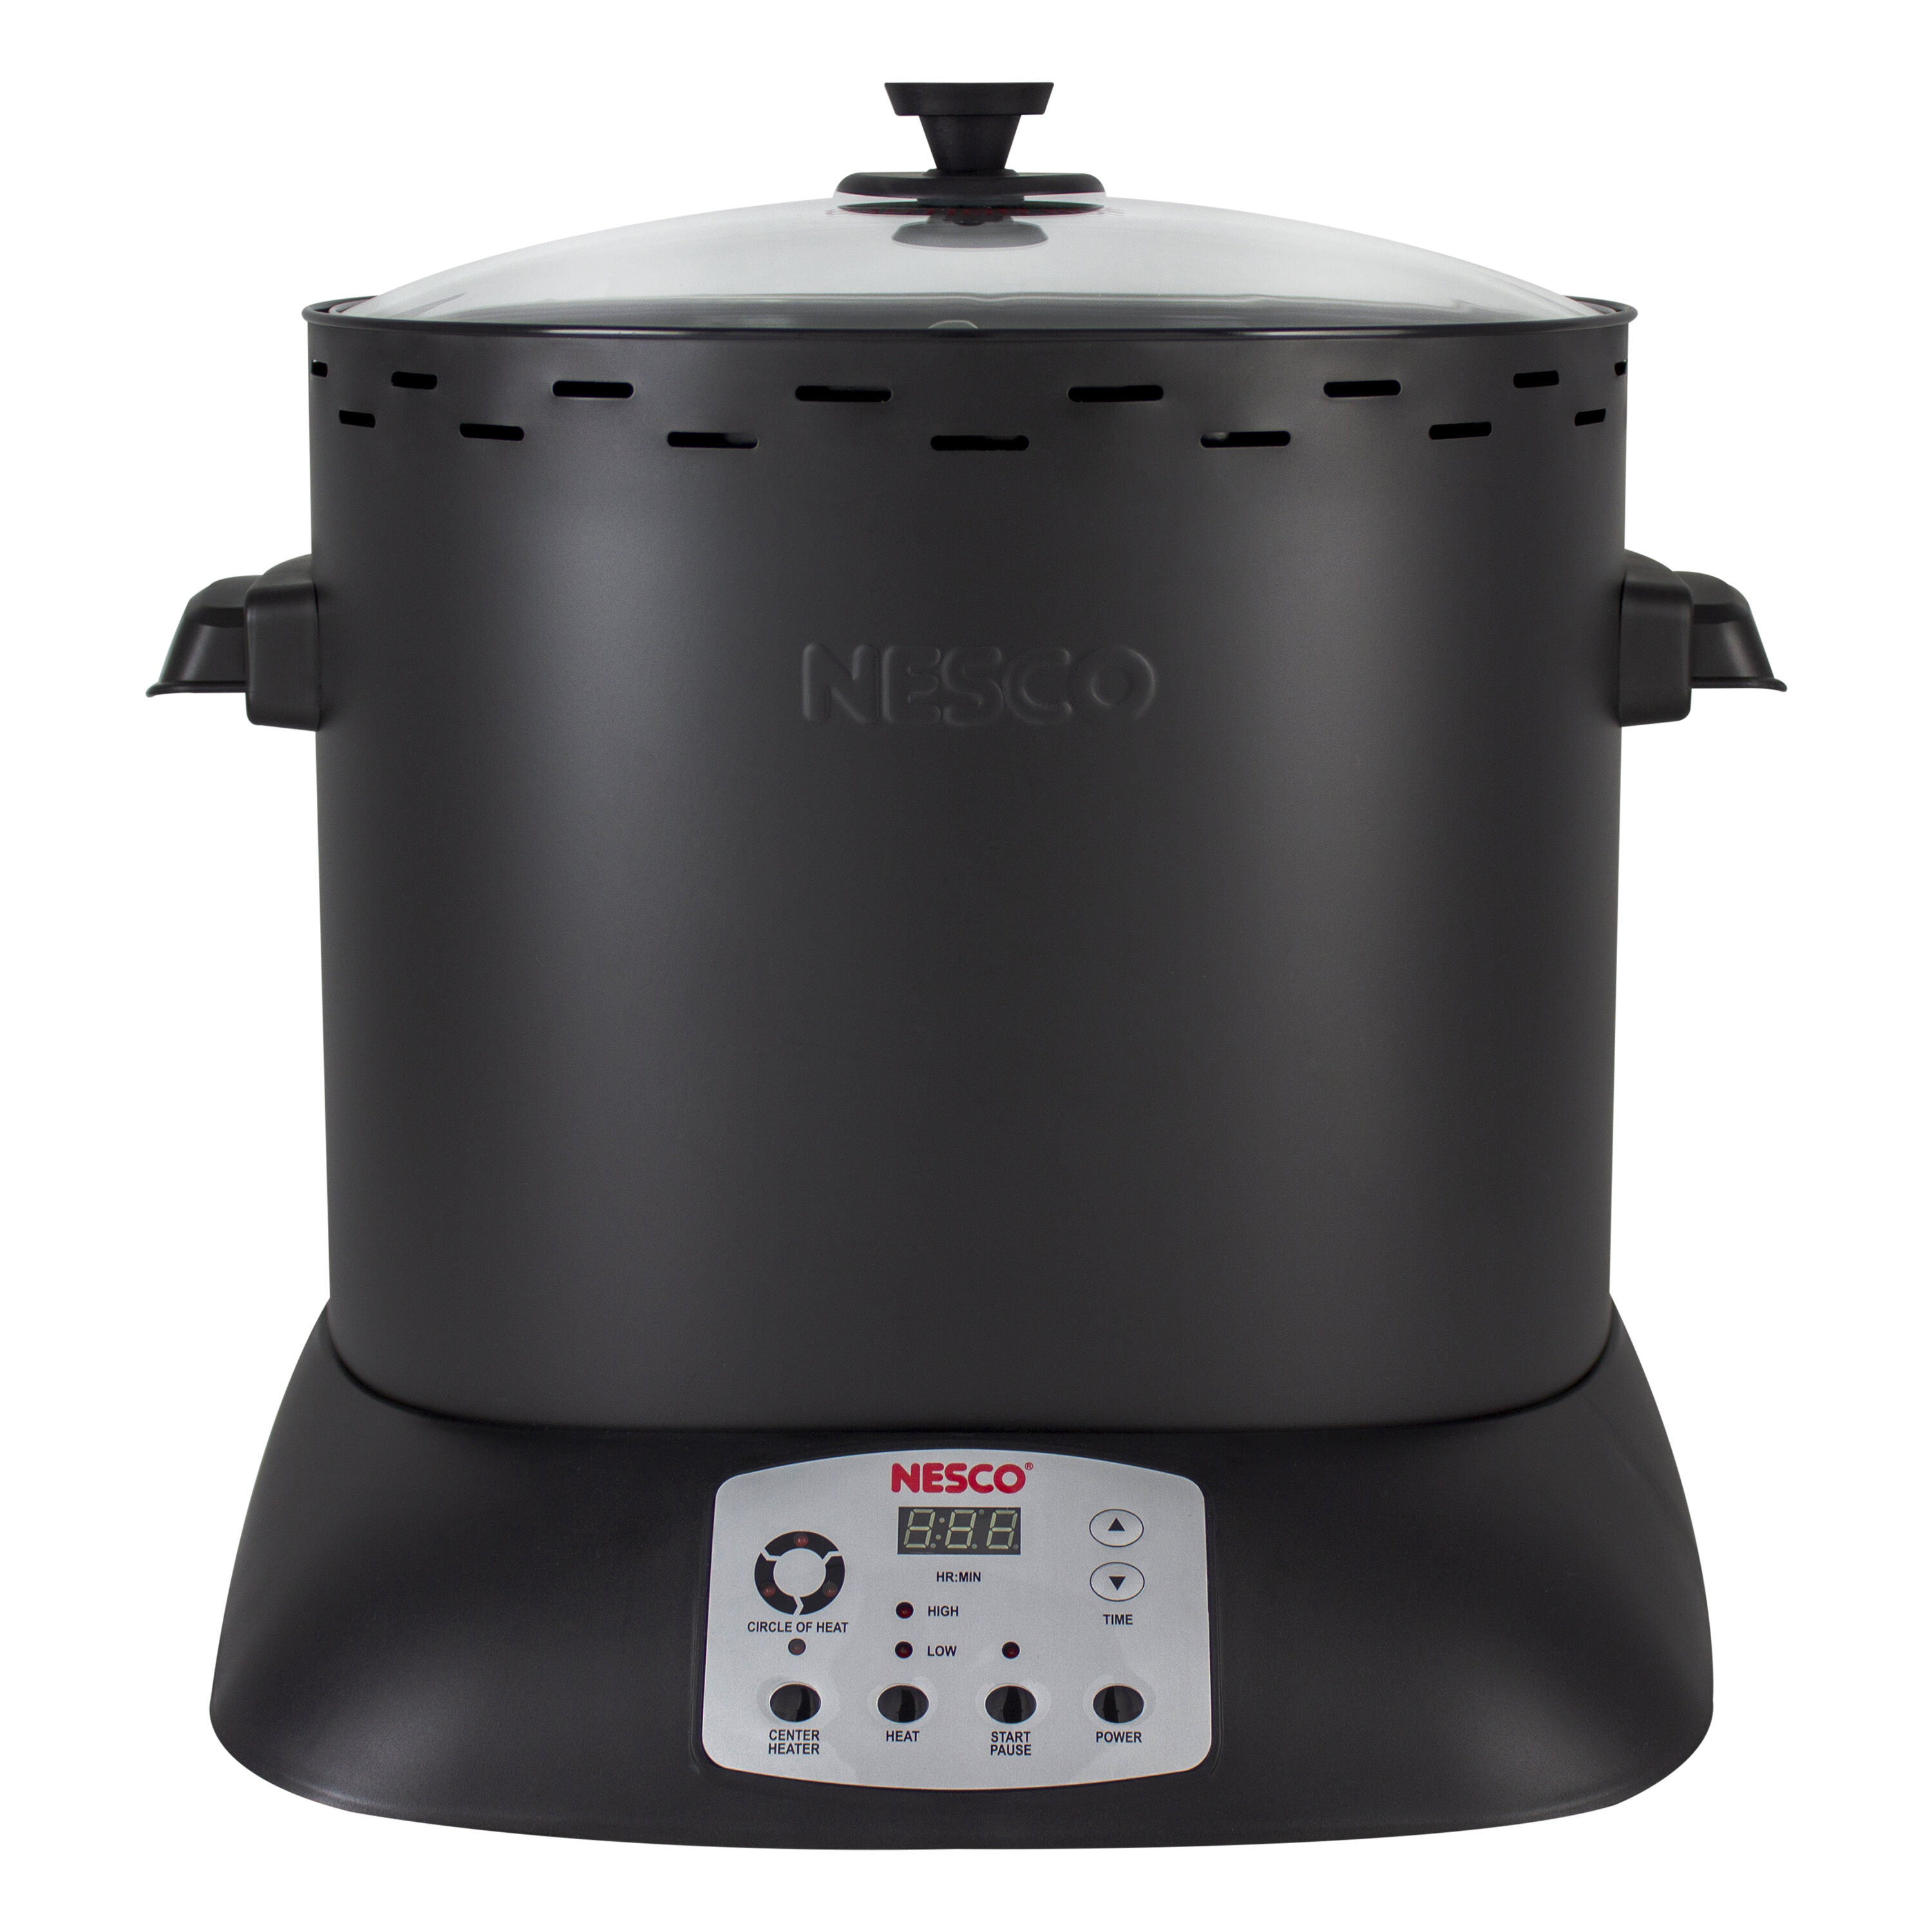 NESCO electric pressure CANNER & cooker ~~~ I really WANTED to love you! 